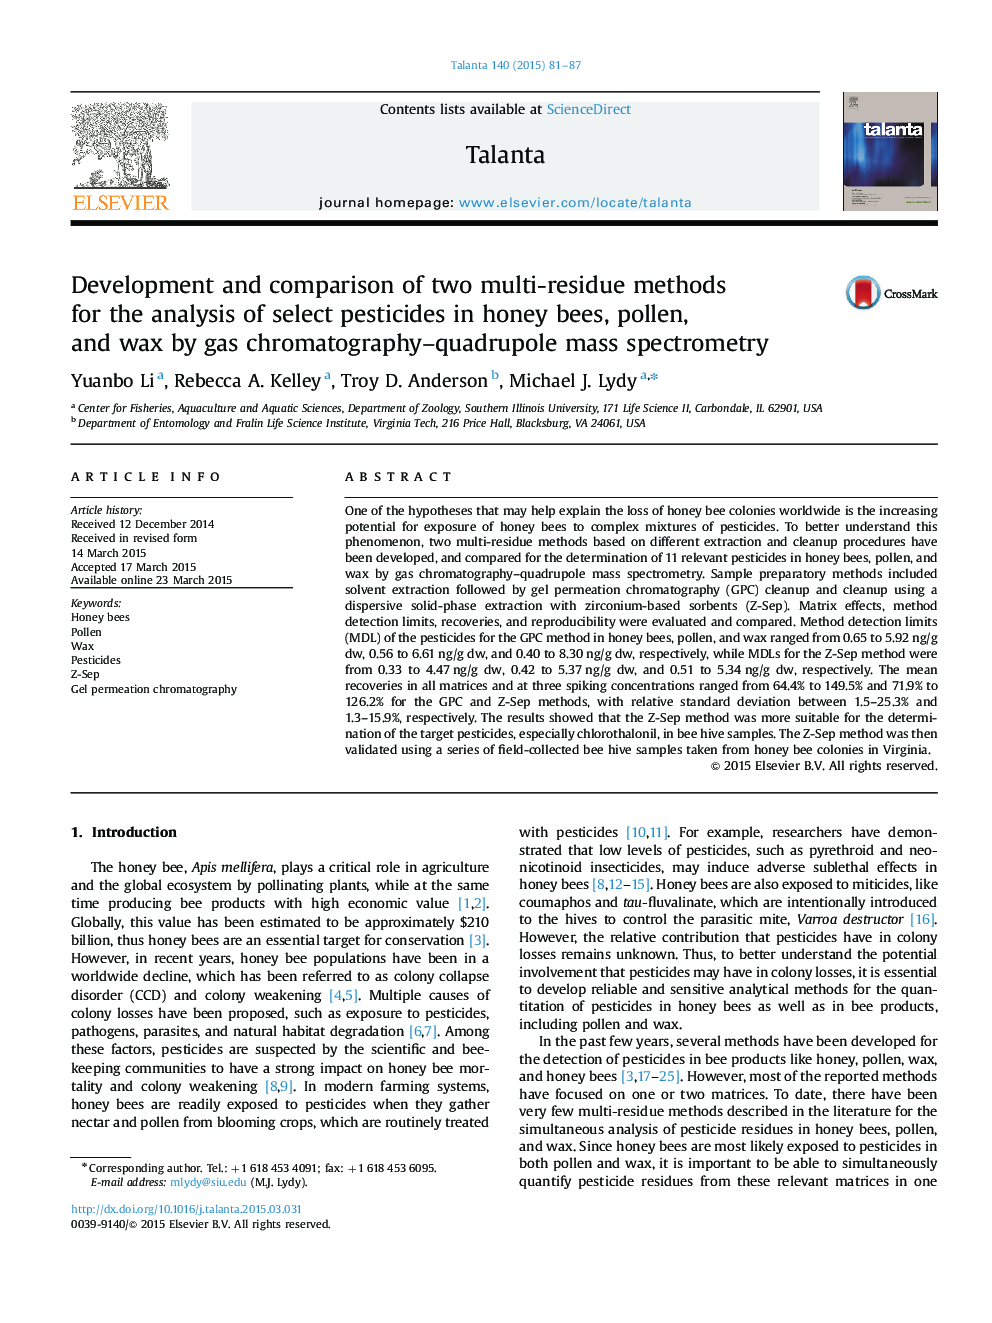 Development and comparison of two multi-residue methods for the analysis of select pesticides in honey bees, pollen, and wax by gas chromatography–quadrupole mass spectrometry